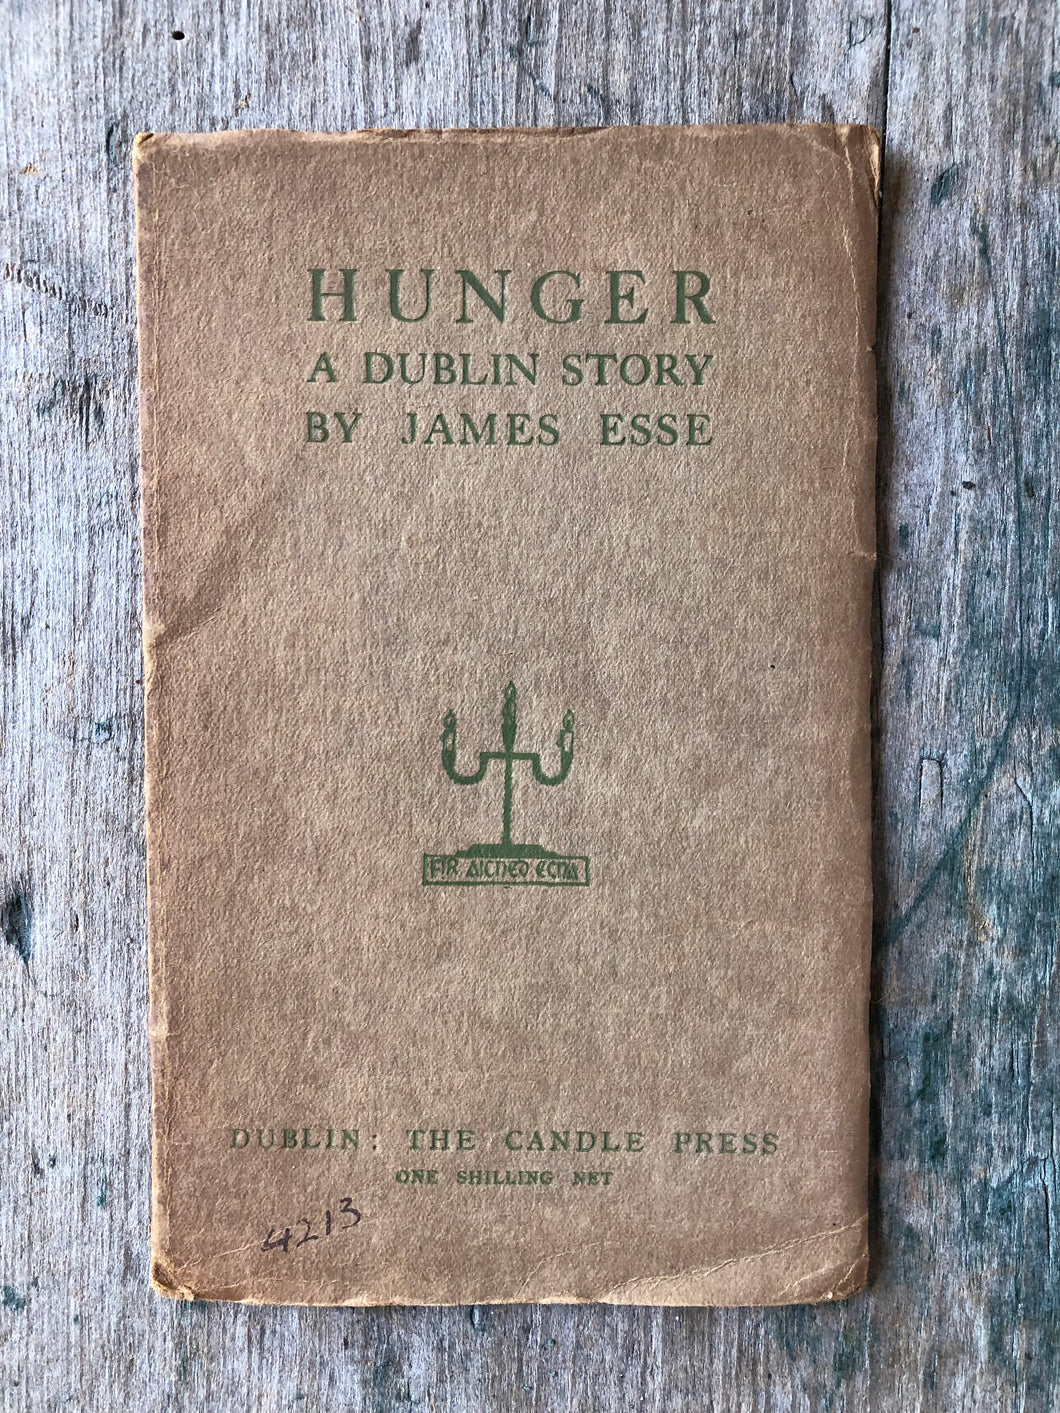 Hunger: A Dublin Story by James Esse